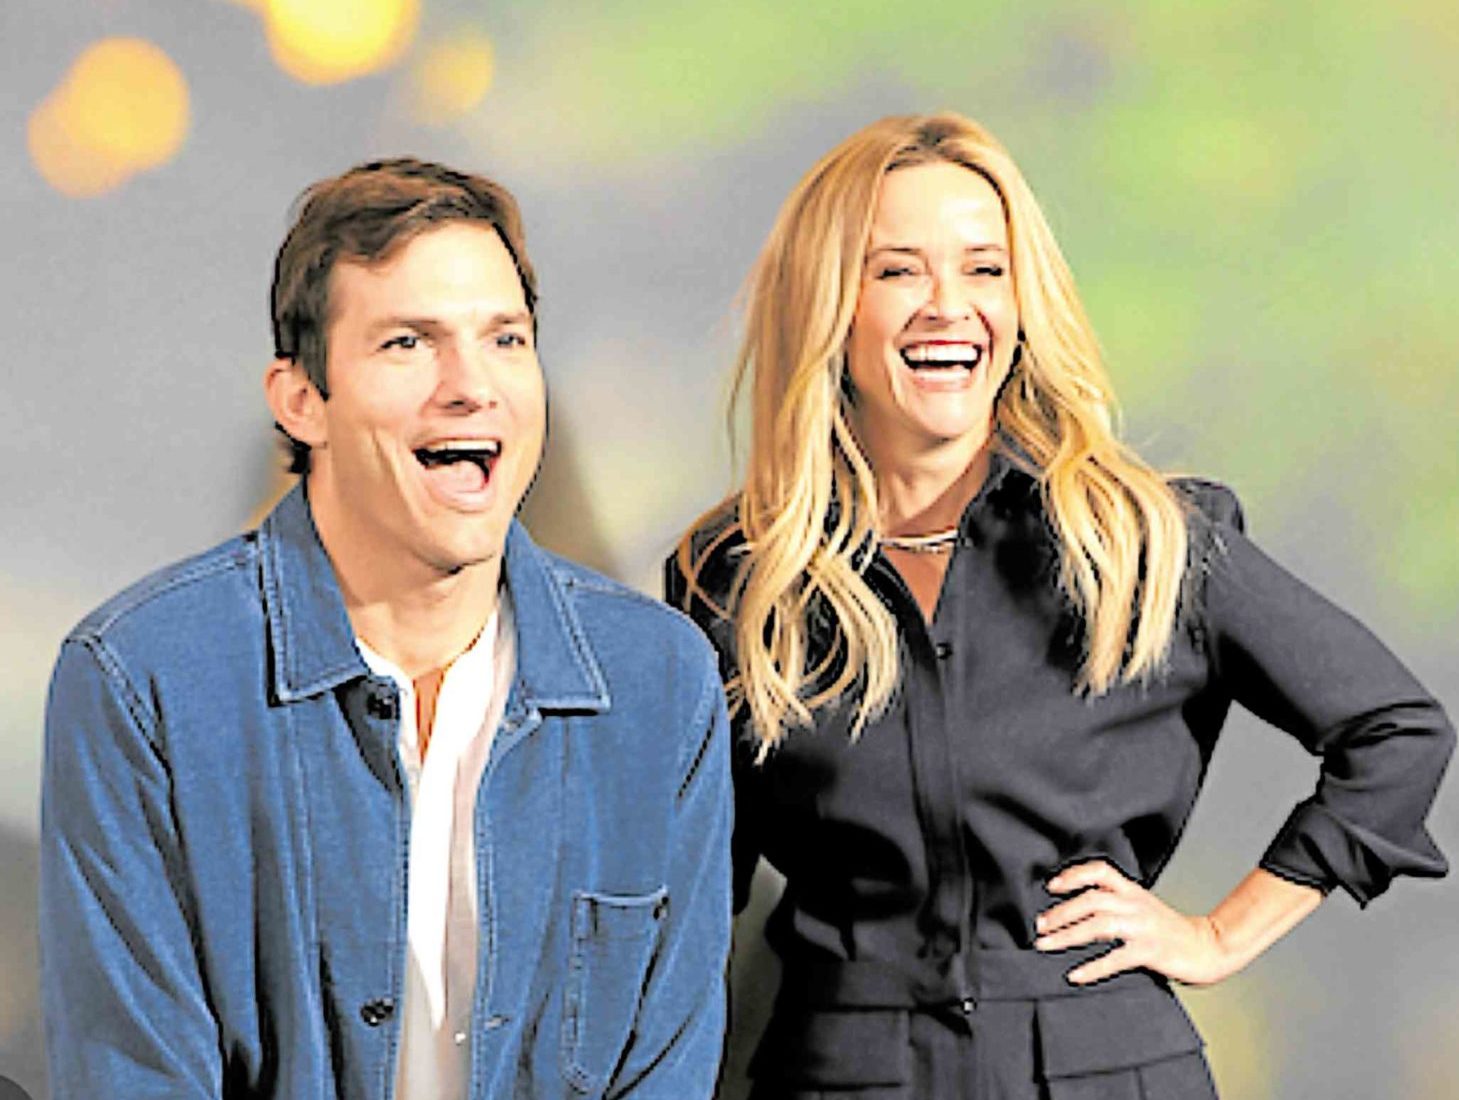 Ashton Kutcher (left) and Reese Witherspoon